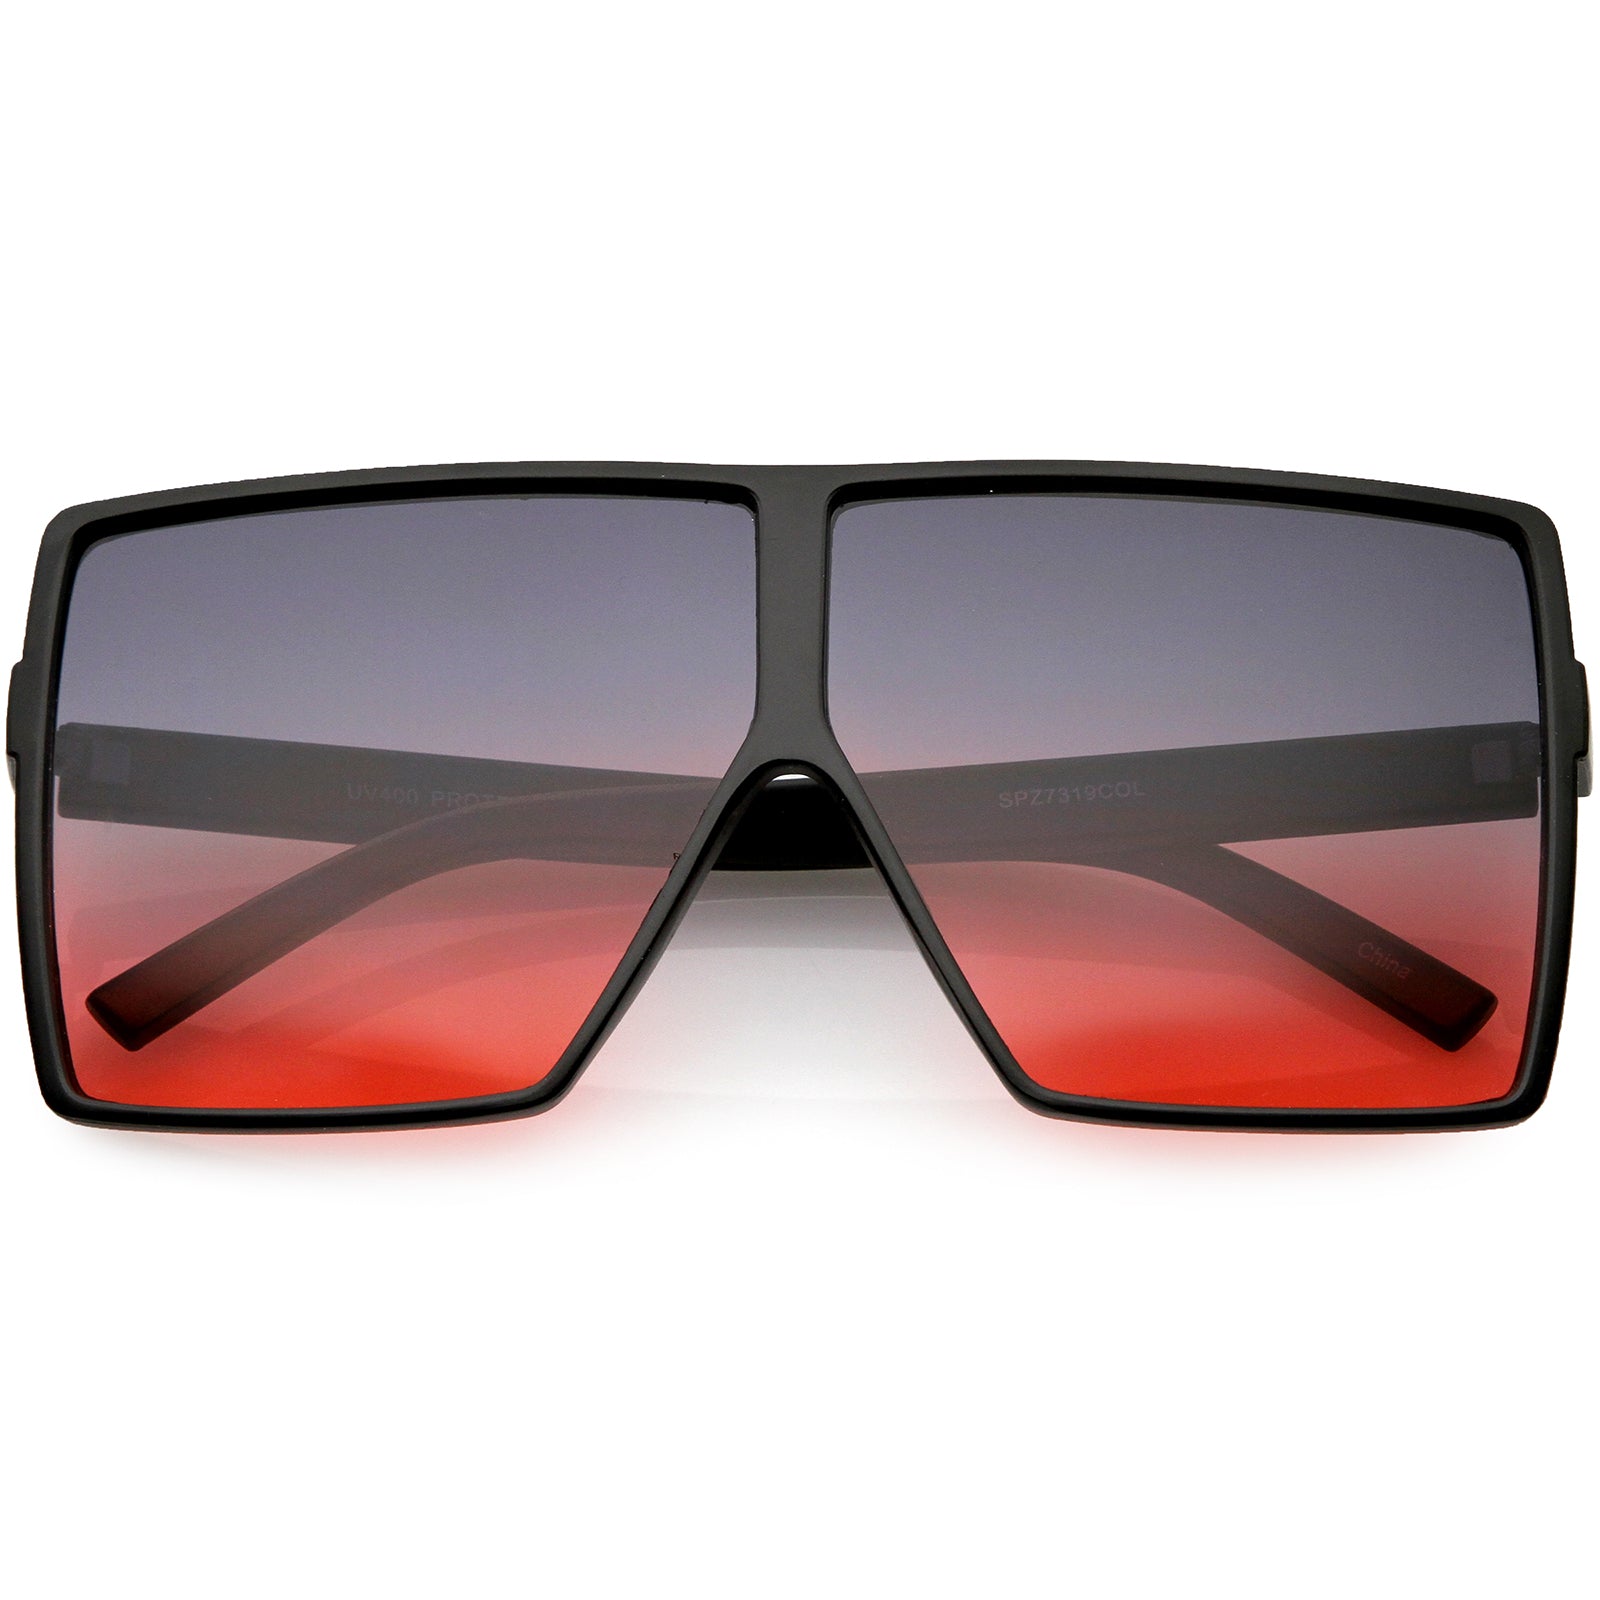 Buy Armear Oversized Square Sunglasses Big Frame Flat Top Shield (Black and  Leopard, 68) at Amazon.in